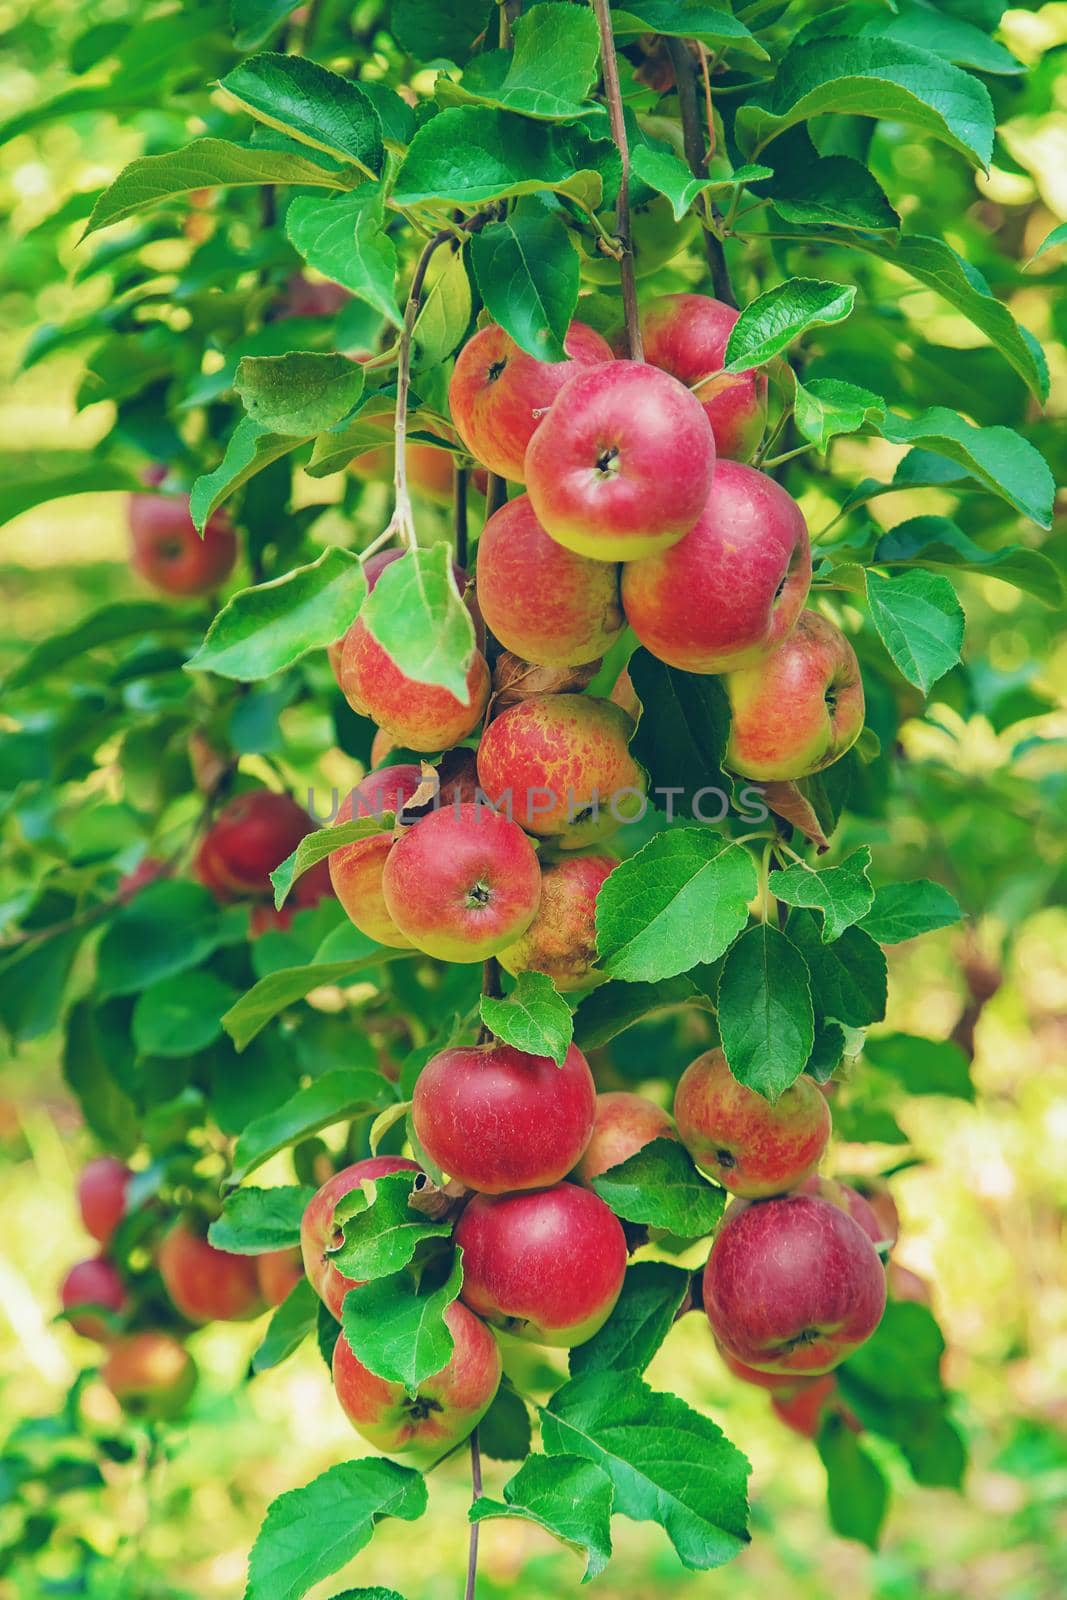 Apples on a tree in the garden. Selective focus. by yanadjana